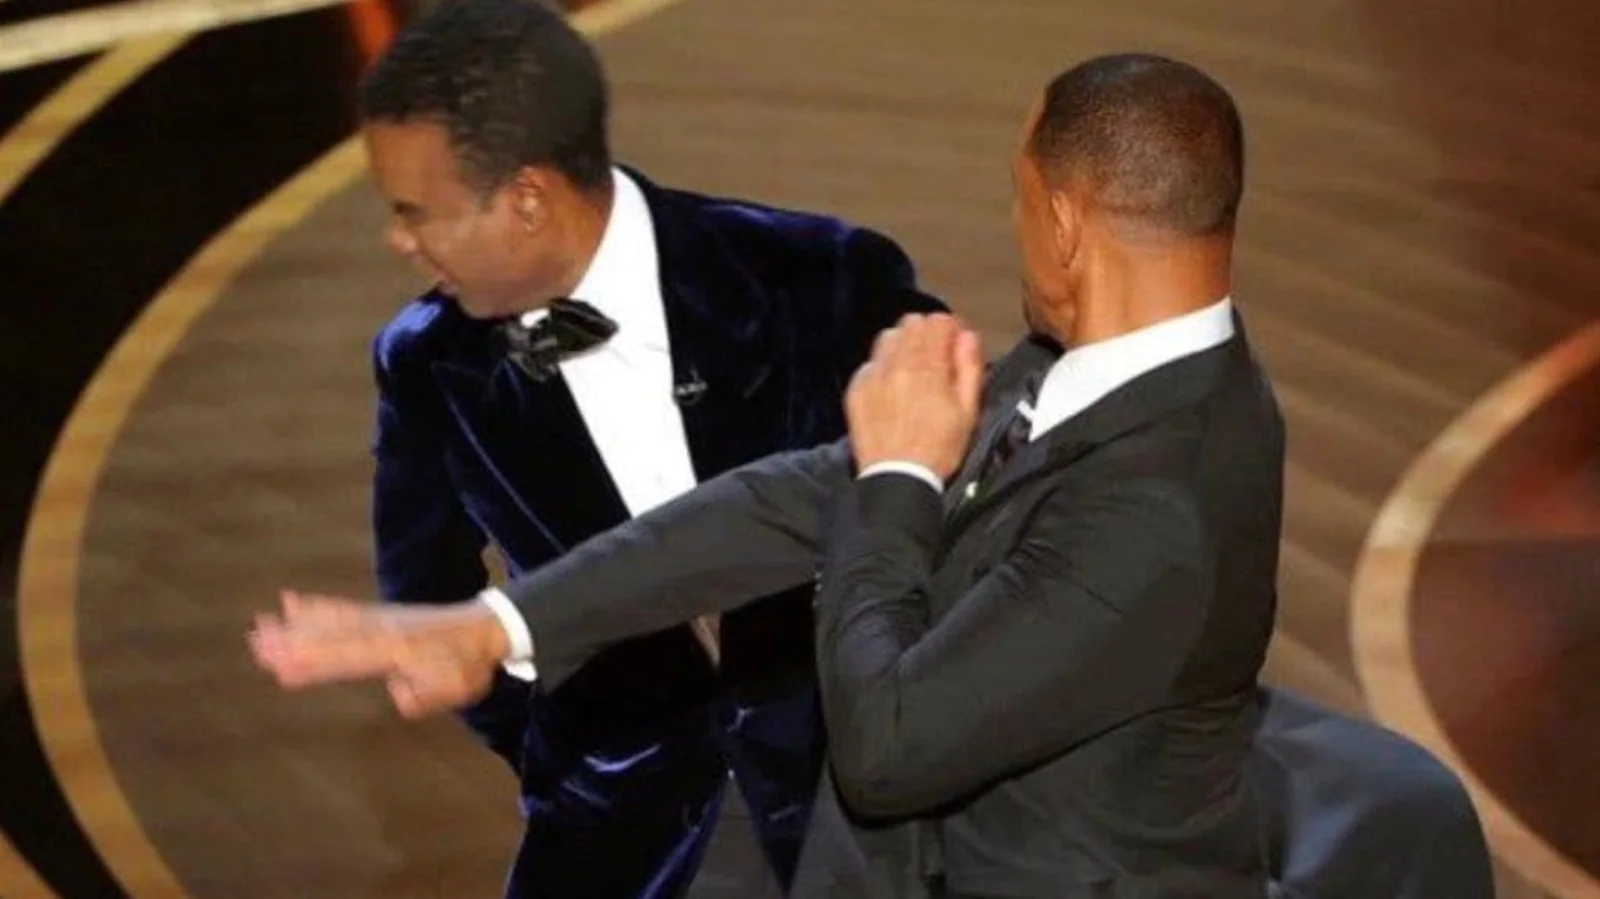 Oscars 2022: Chris Rock’s joke was bad, Will Smith’s reaction worse. And has anyone asked what Jada Pinkett Smith wanted